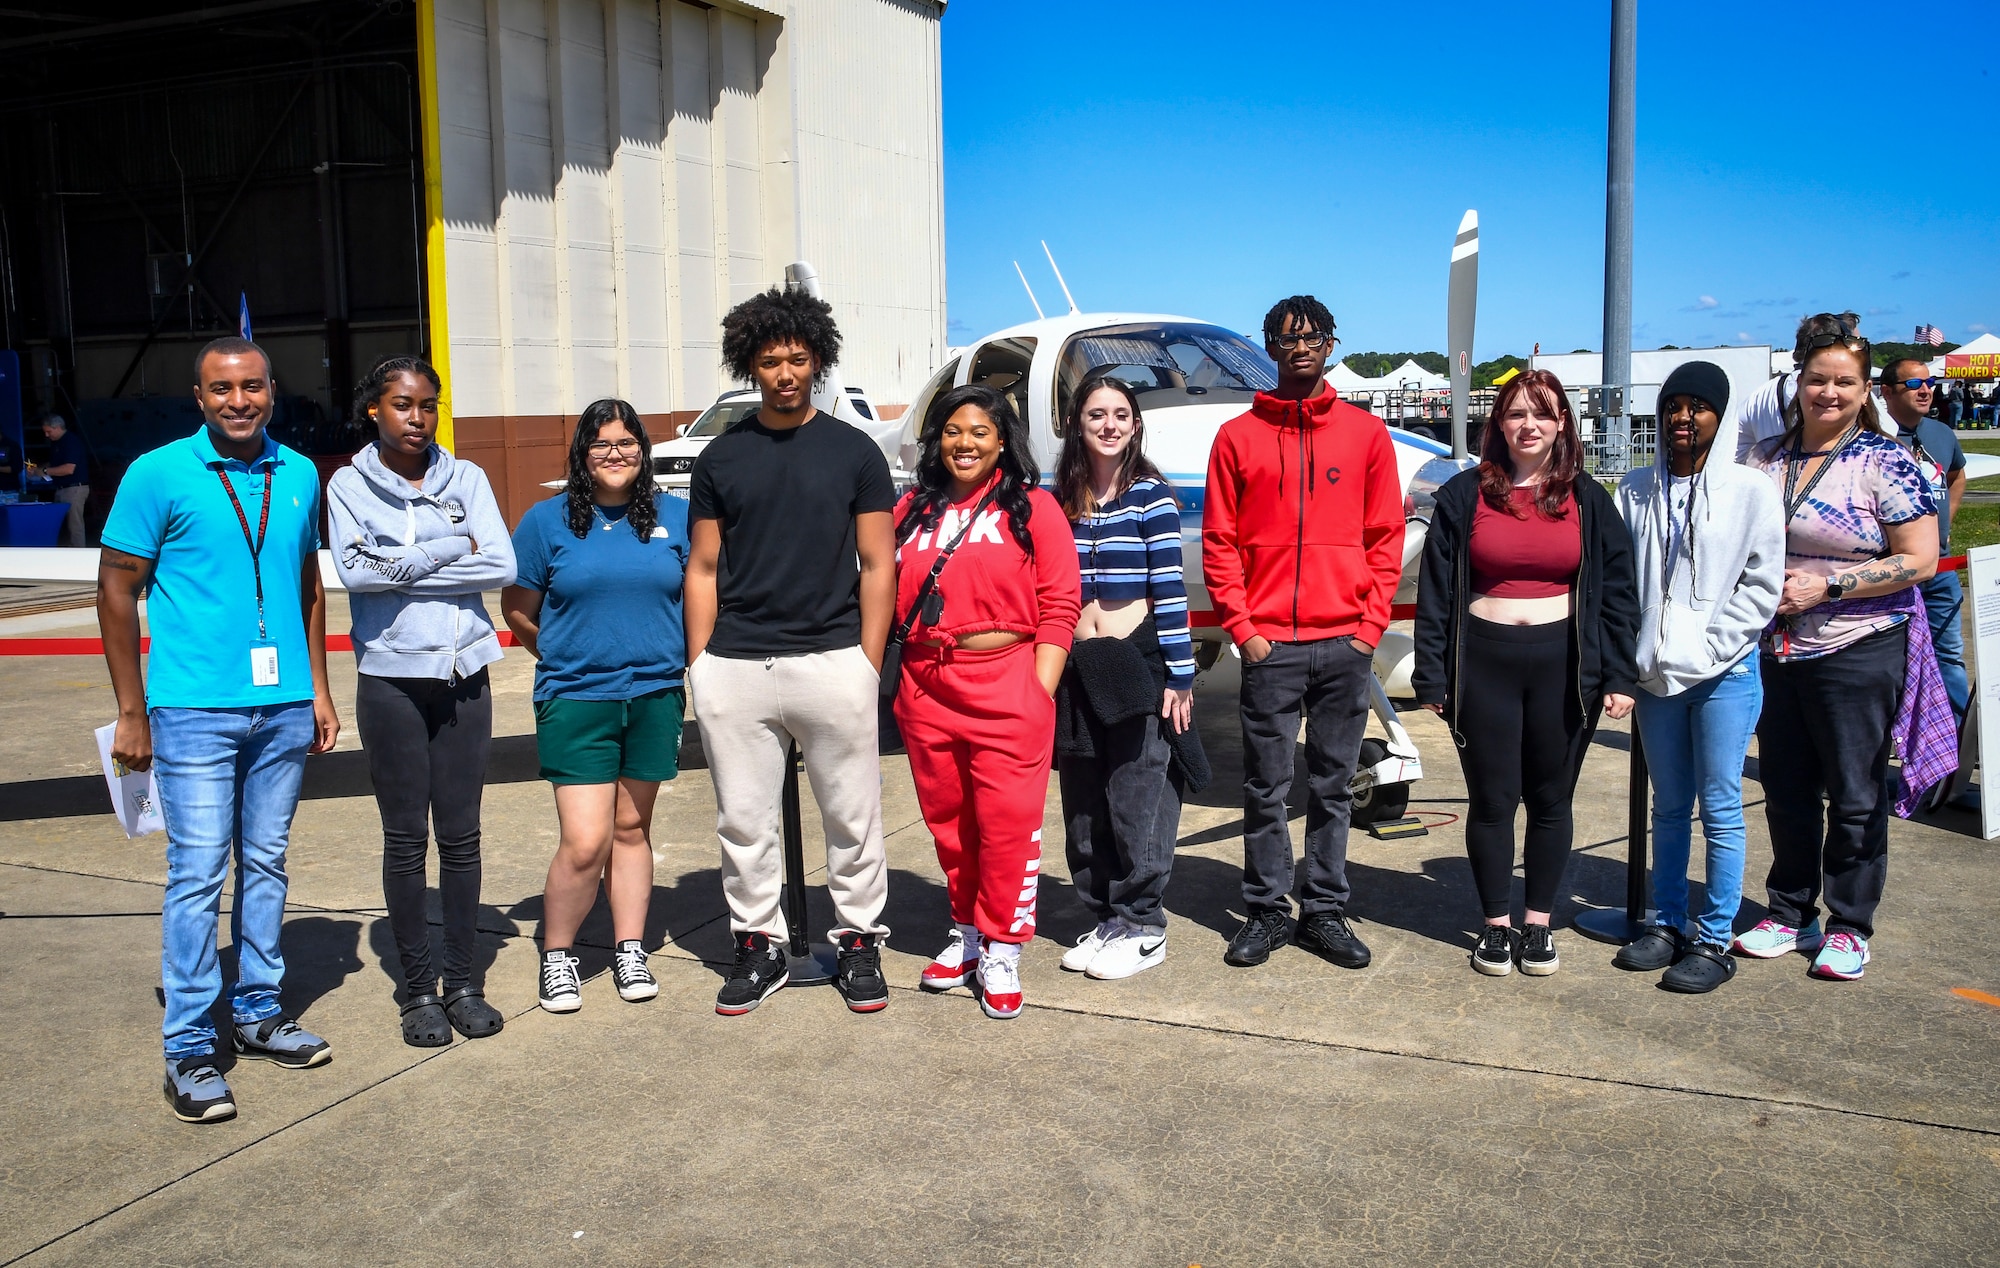 Students pose for group photo in front of aircraft static display.